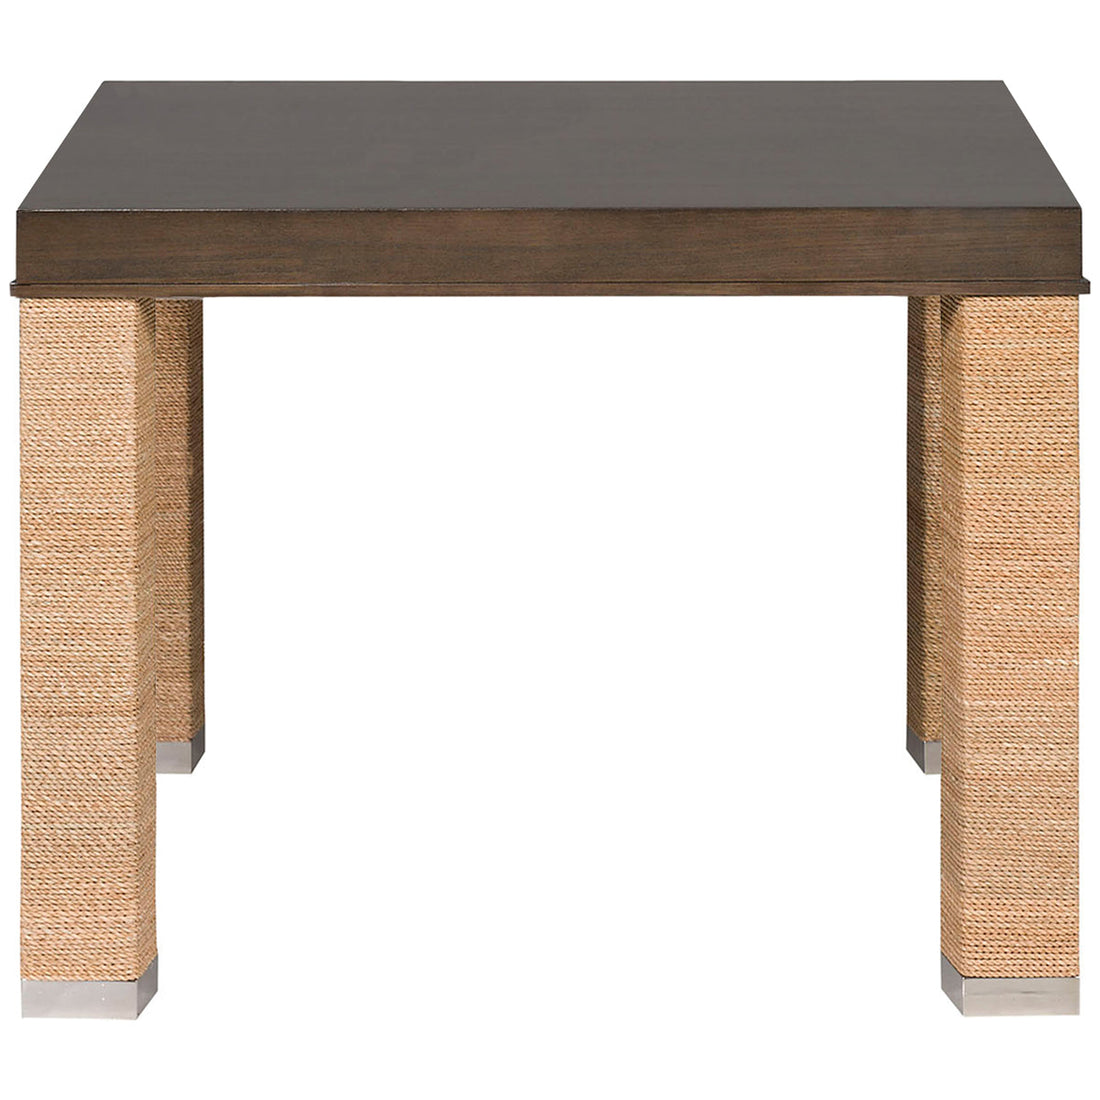 Vanguard Furniture Woven Dining Table